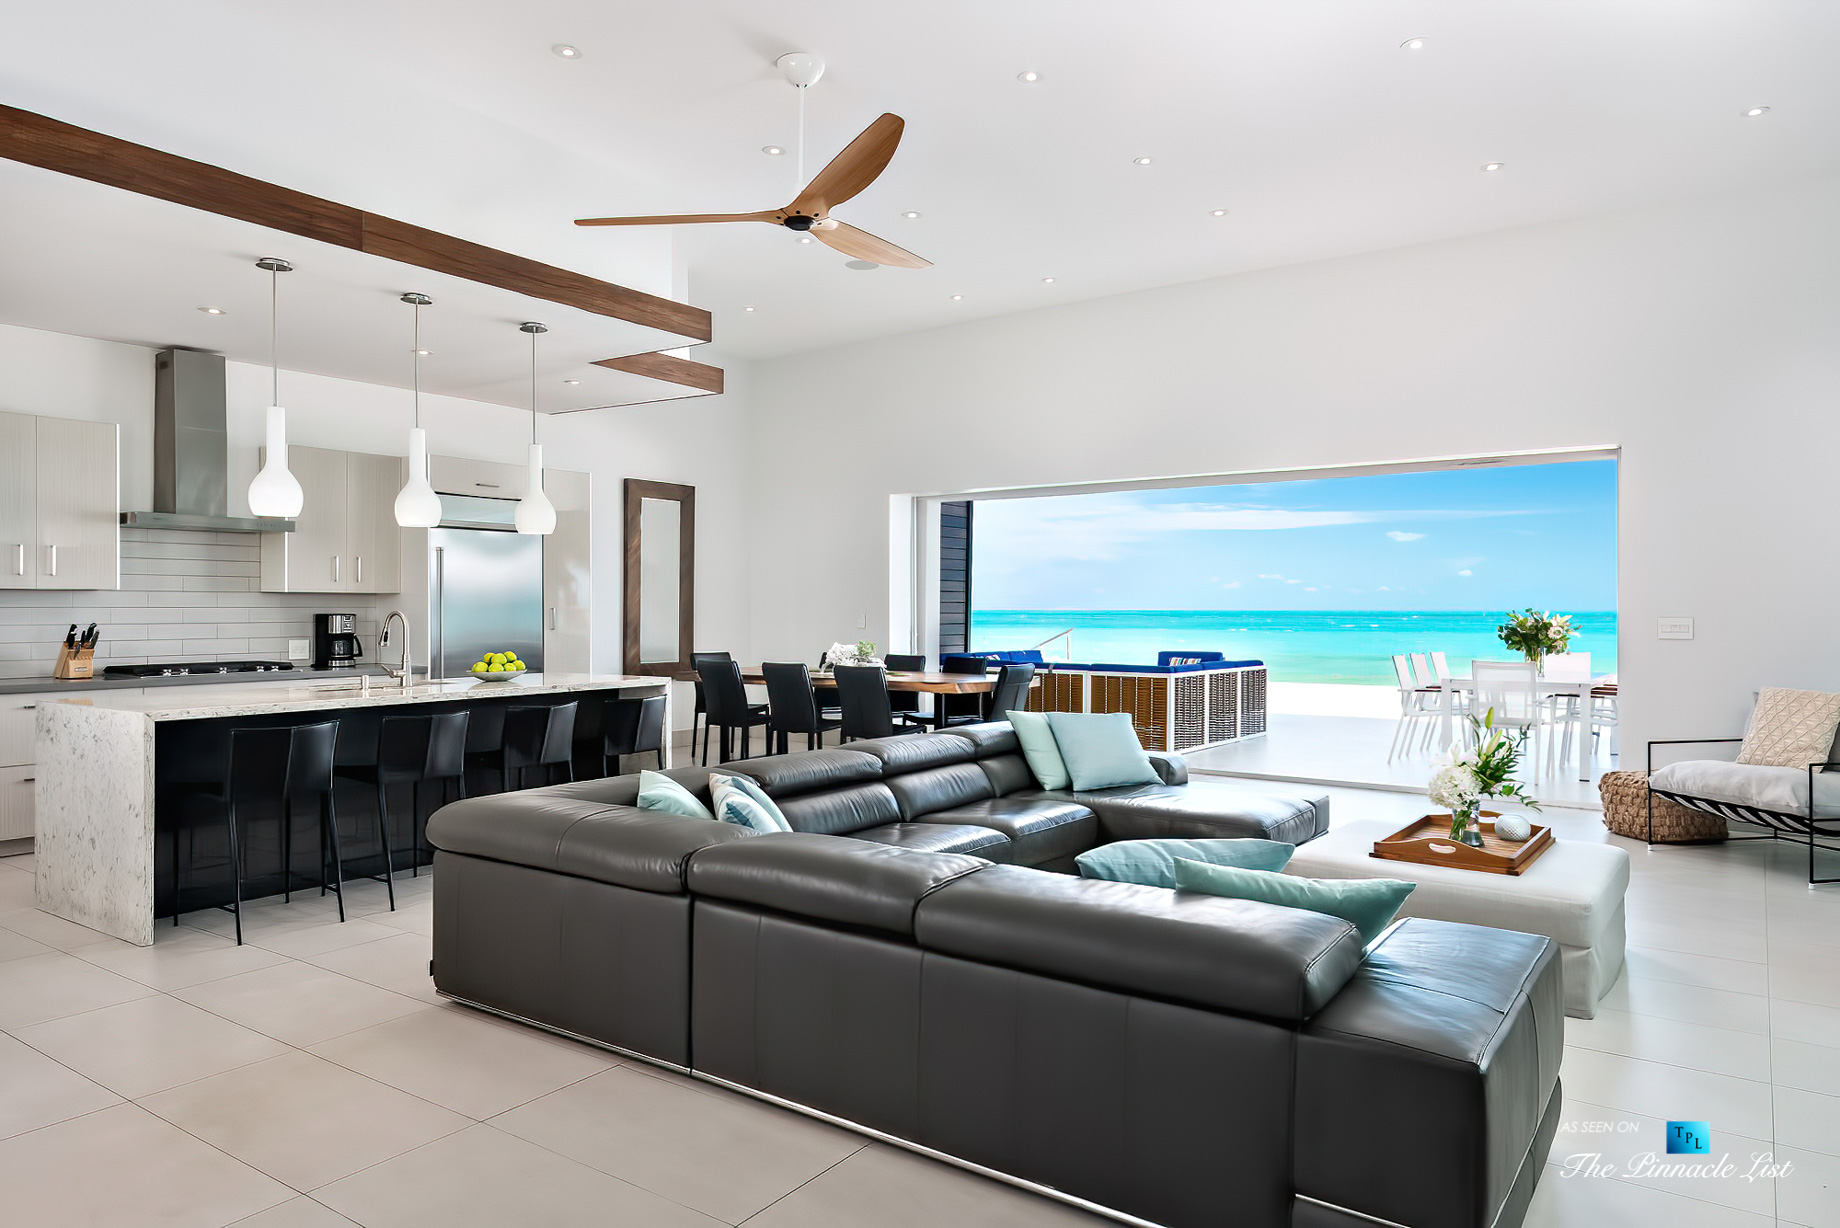 Tip of the Tail Luxury Villa - Providenciales, Turks and Caicos Islands - Living Room